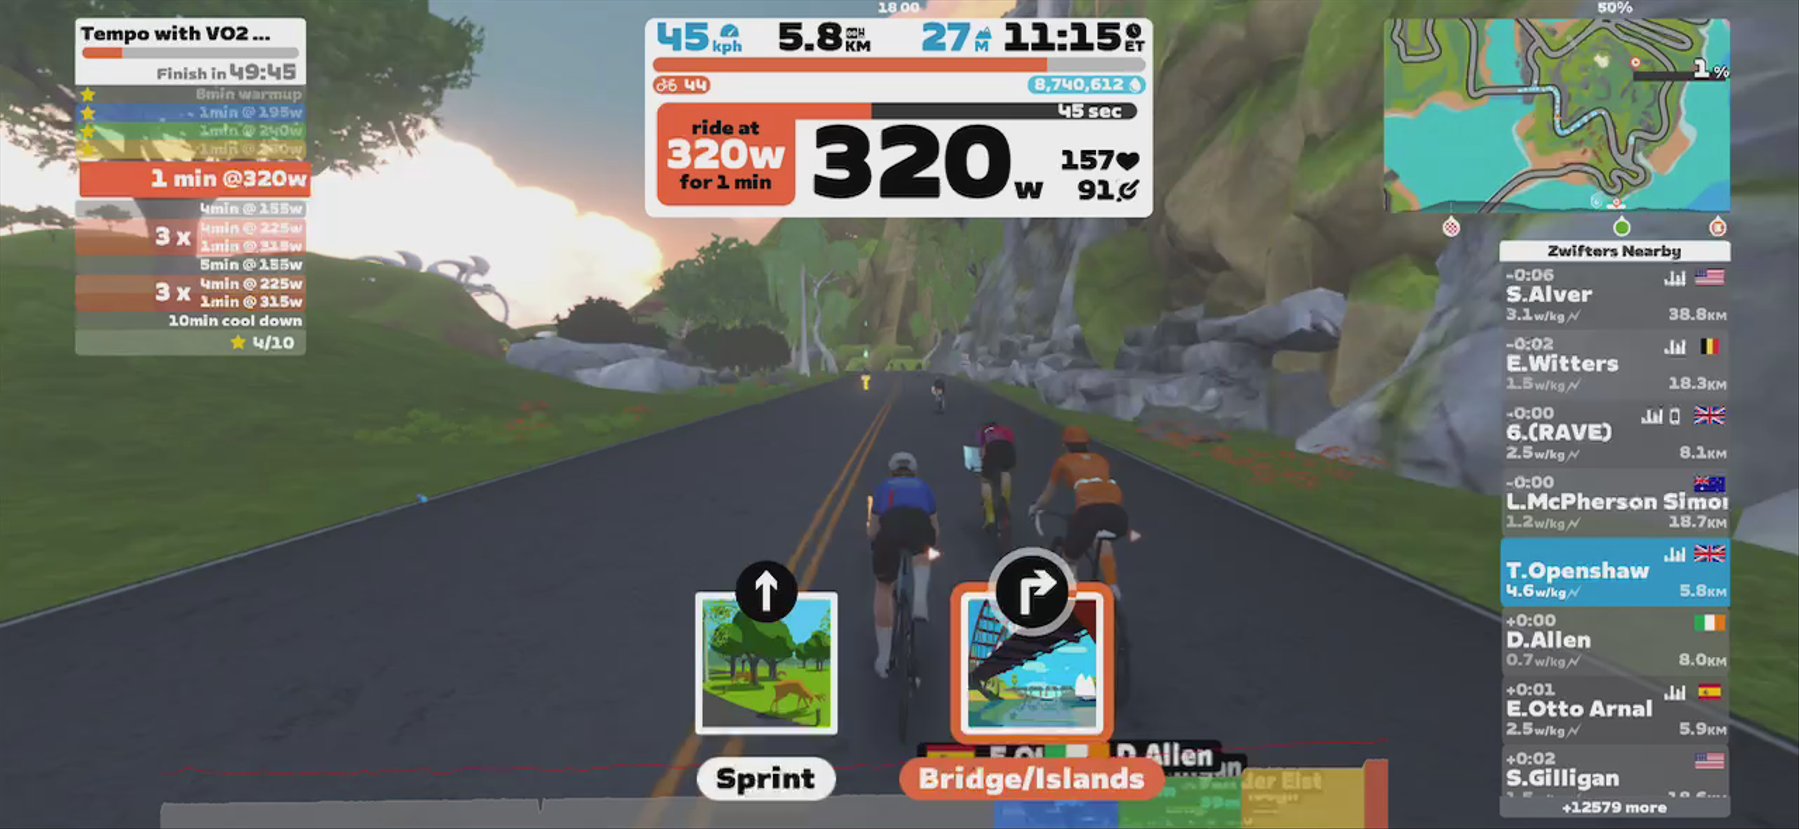 Zwift - Tempo with VO2 Efforts in Watopia